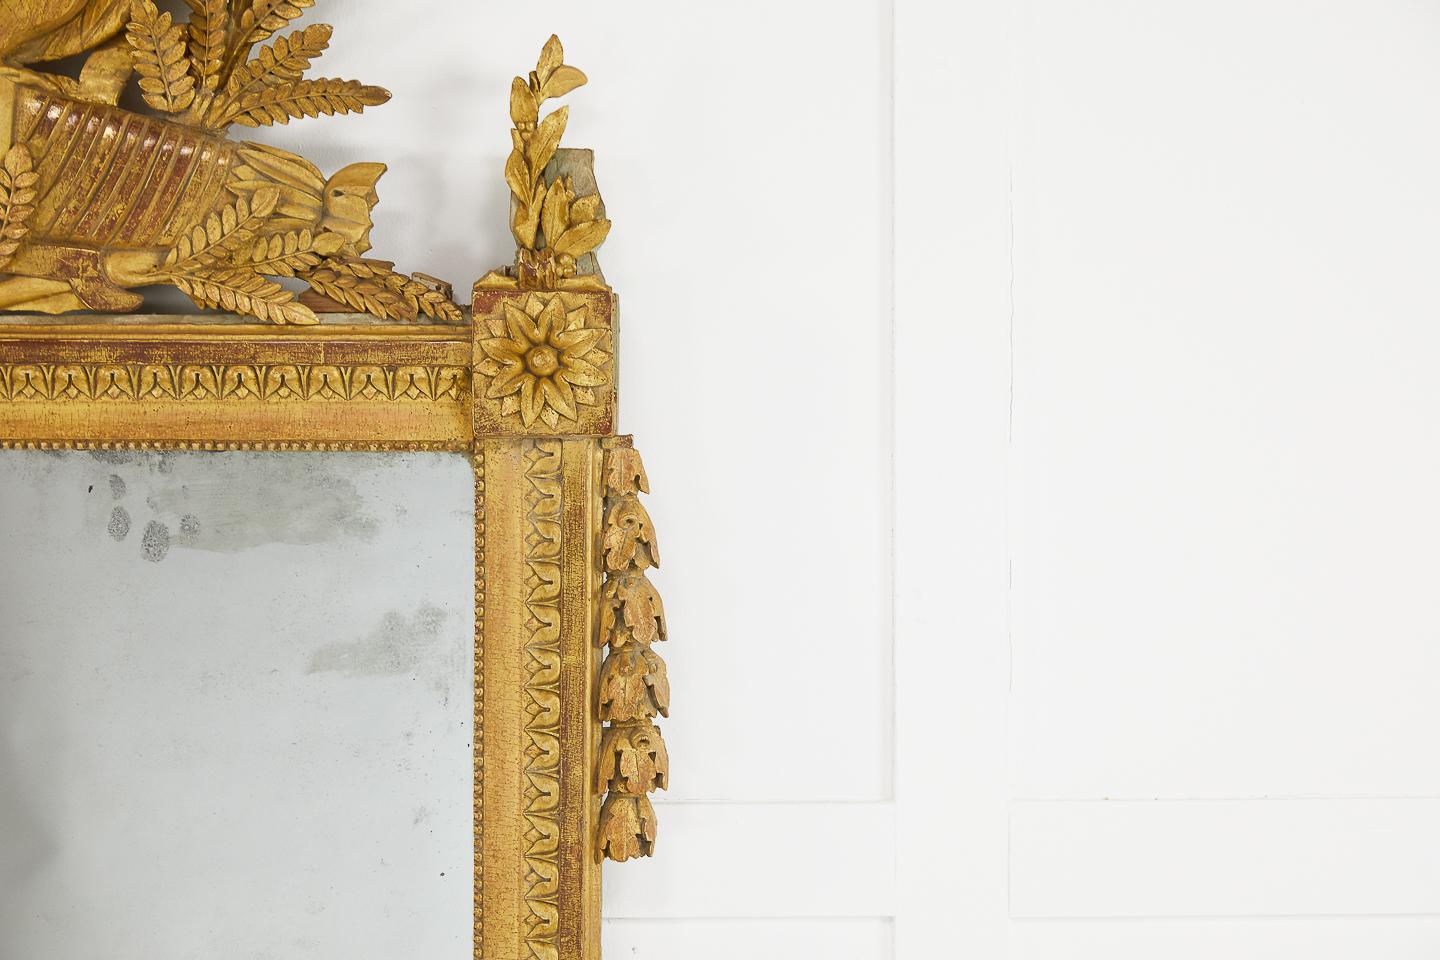 18th century French gilded mirror with carved doves and foliage, retaining its beautiful, original faded gilding.
 